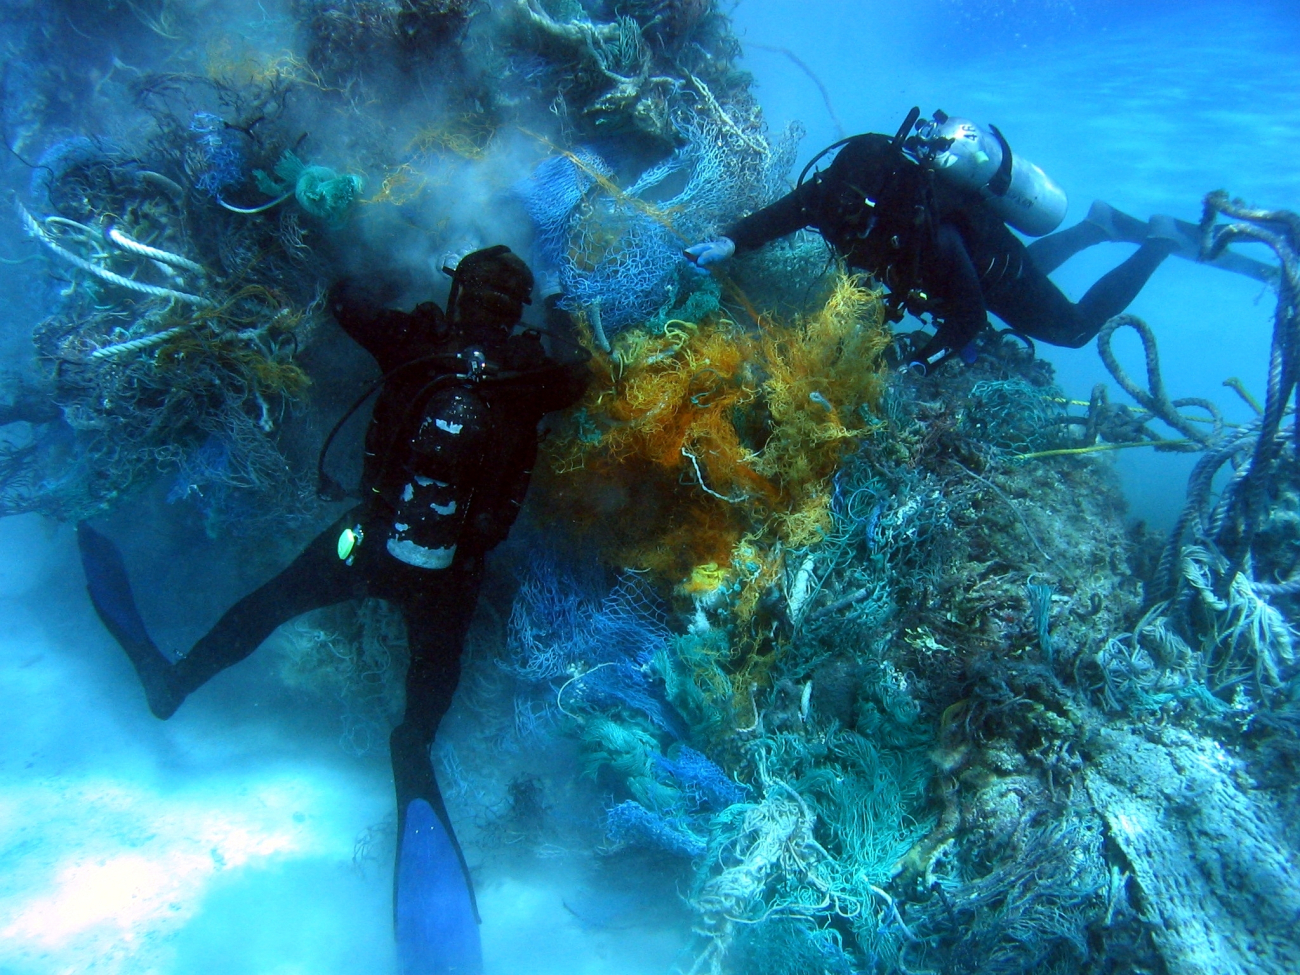 Scuba divers removing derelict net from reef